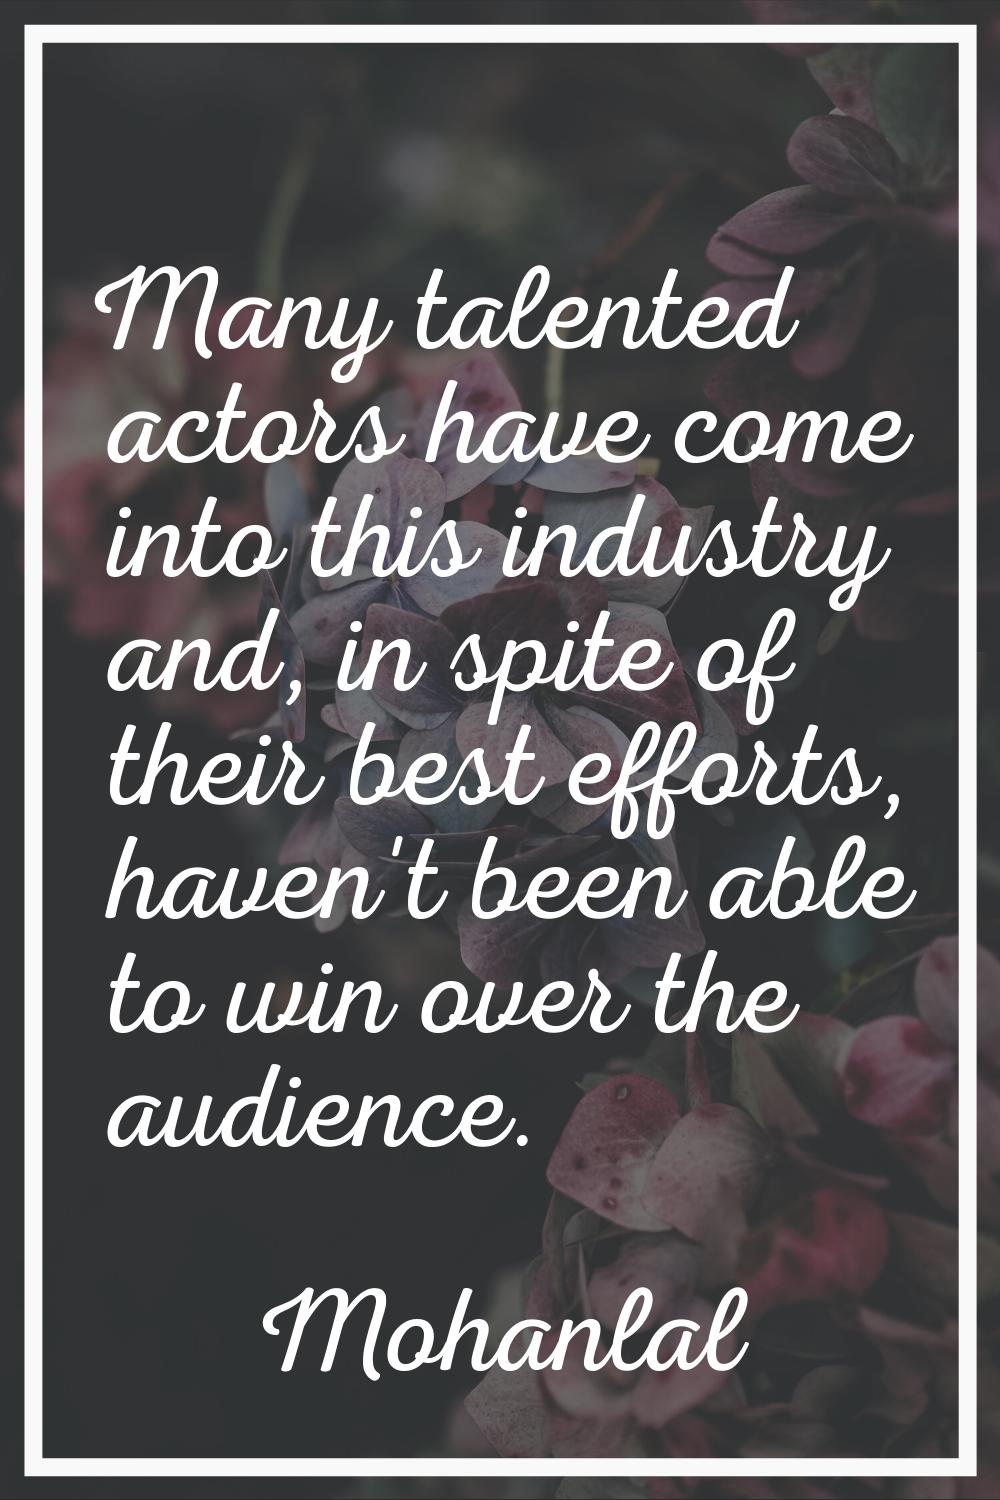 Many talented actors have come into this industry and, in spite of their best efforts, haven't been